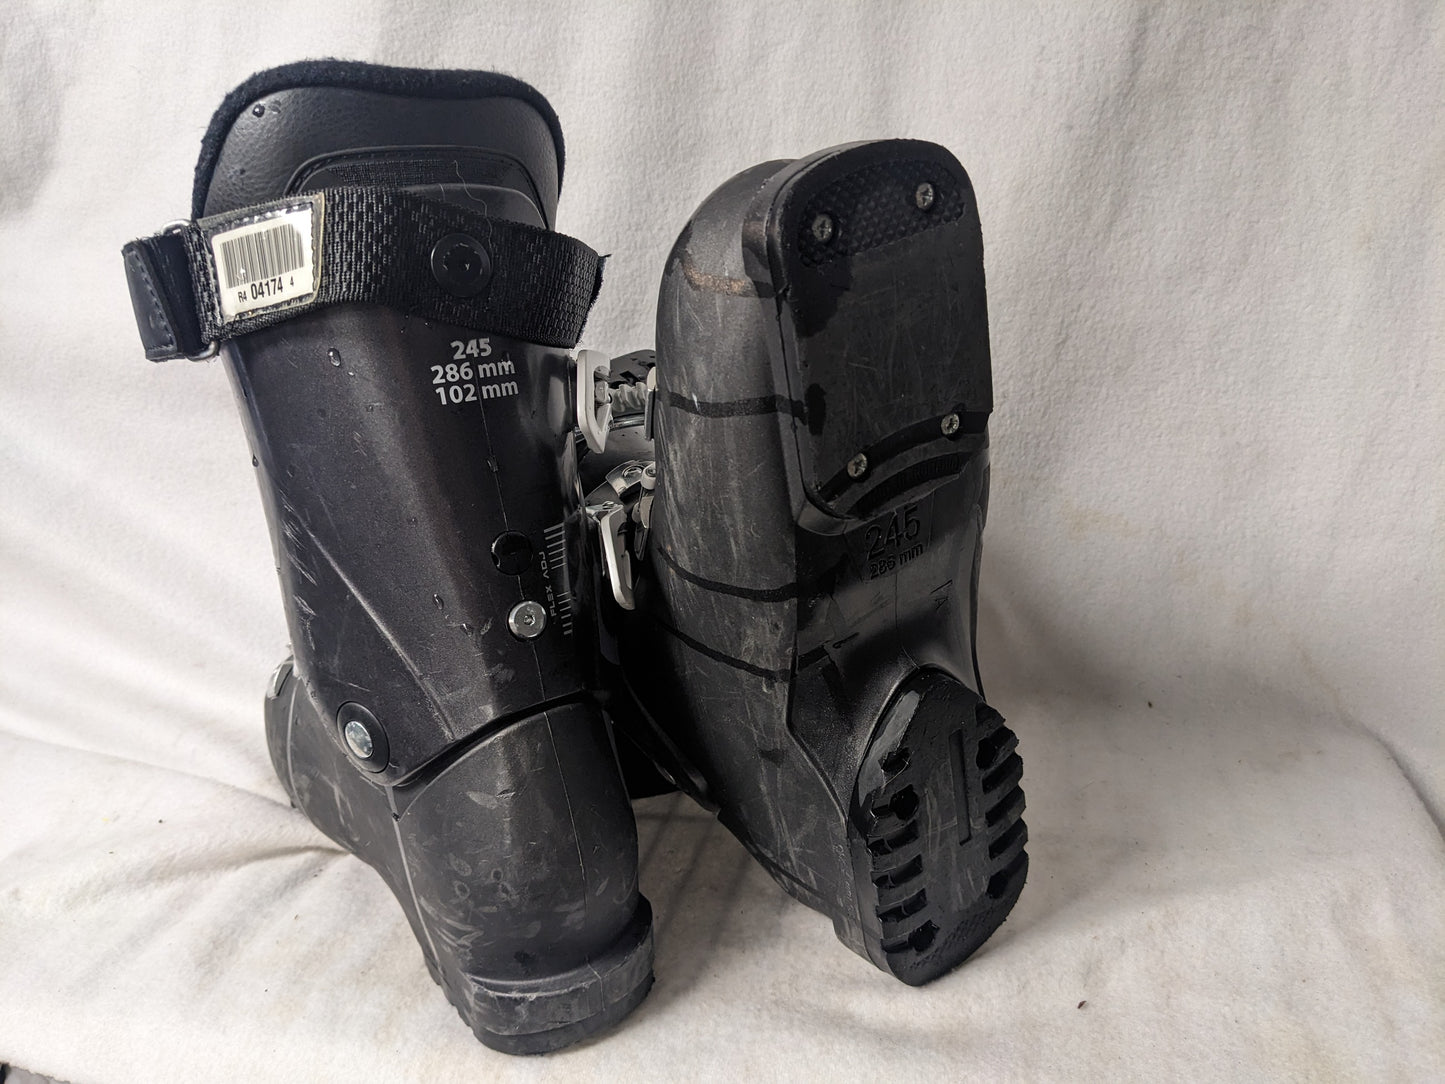 Lange SX RTL Ski Boots Size 24.5 Color Black Condition Used